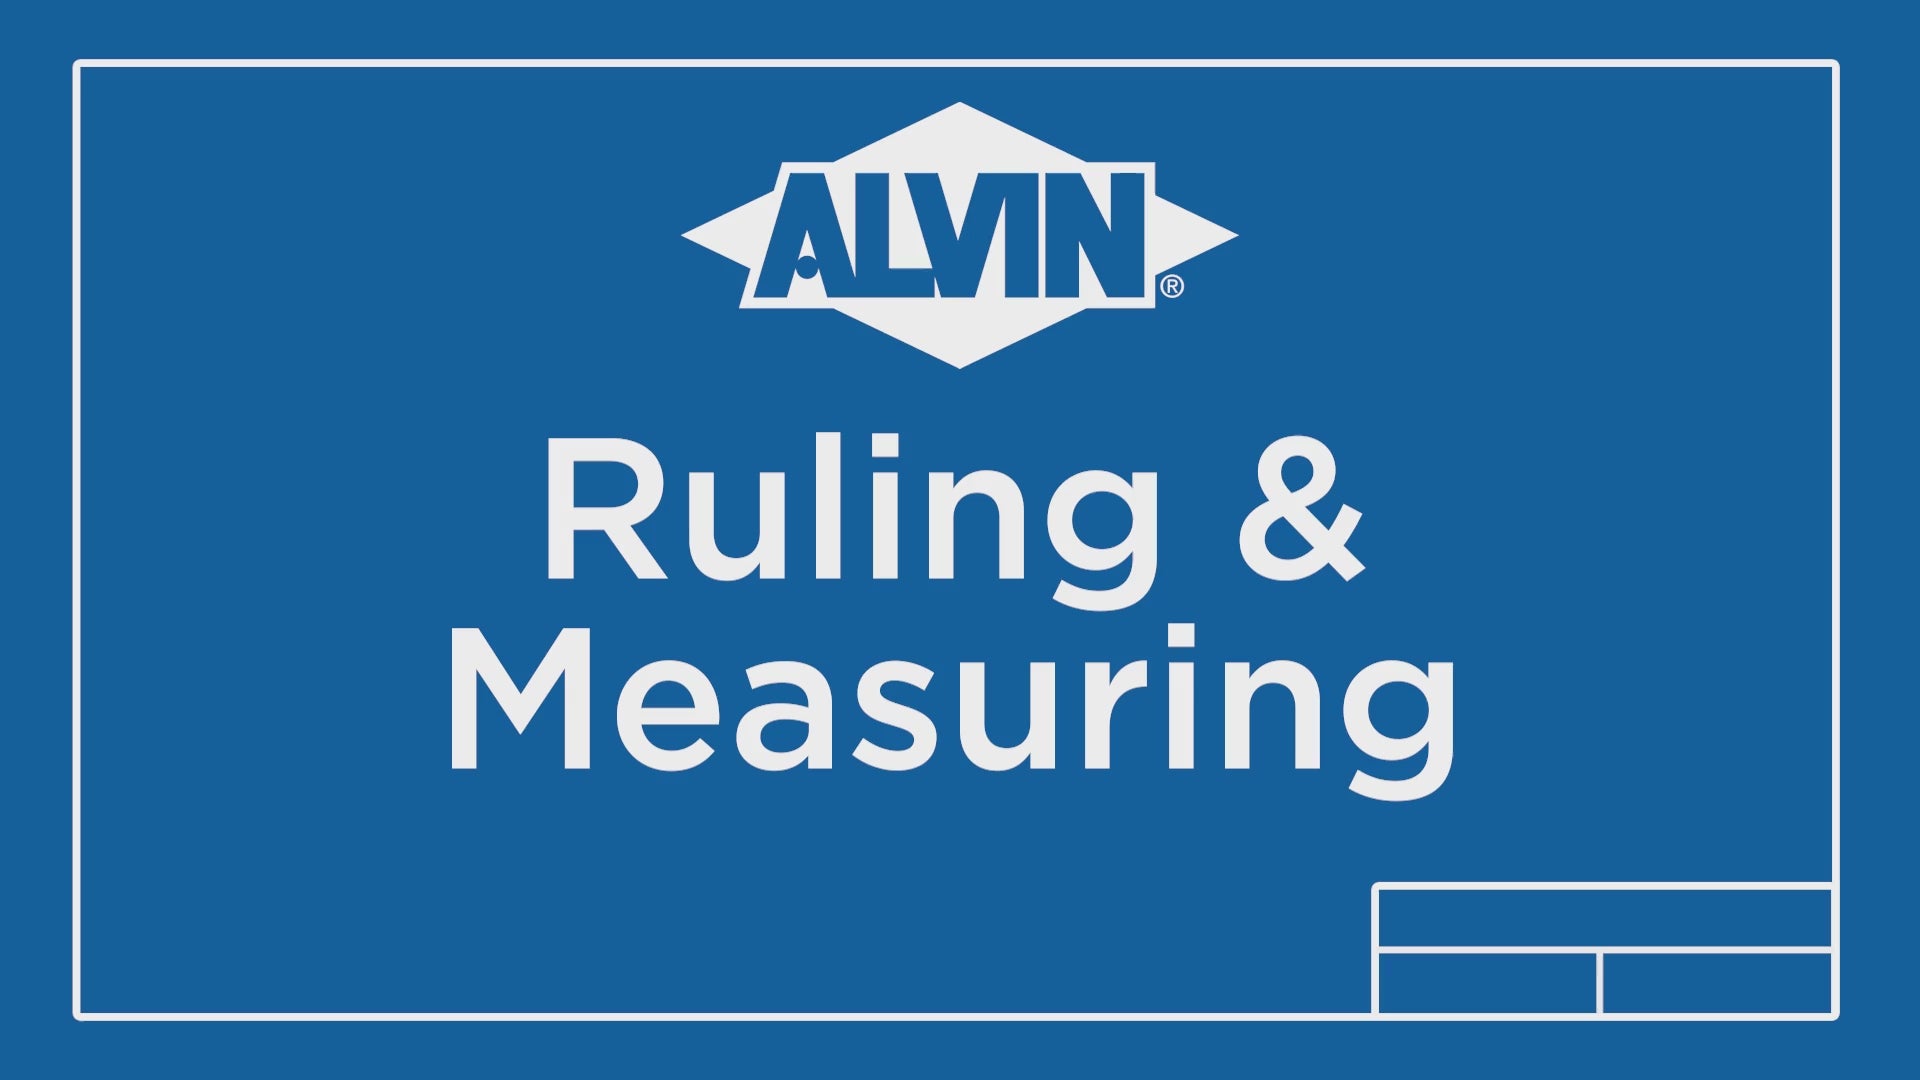 Alvin 48 Tempered Stainless Steel Cutting Straightedge 1109-48